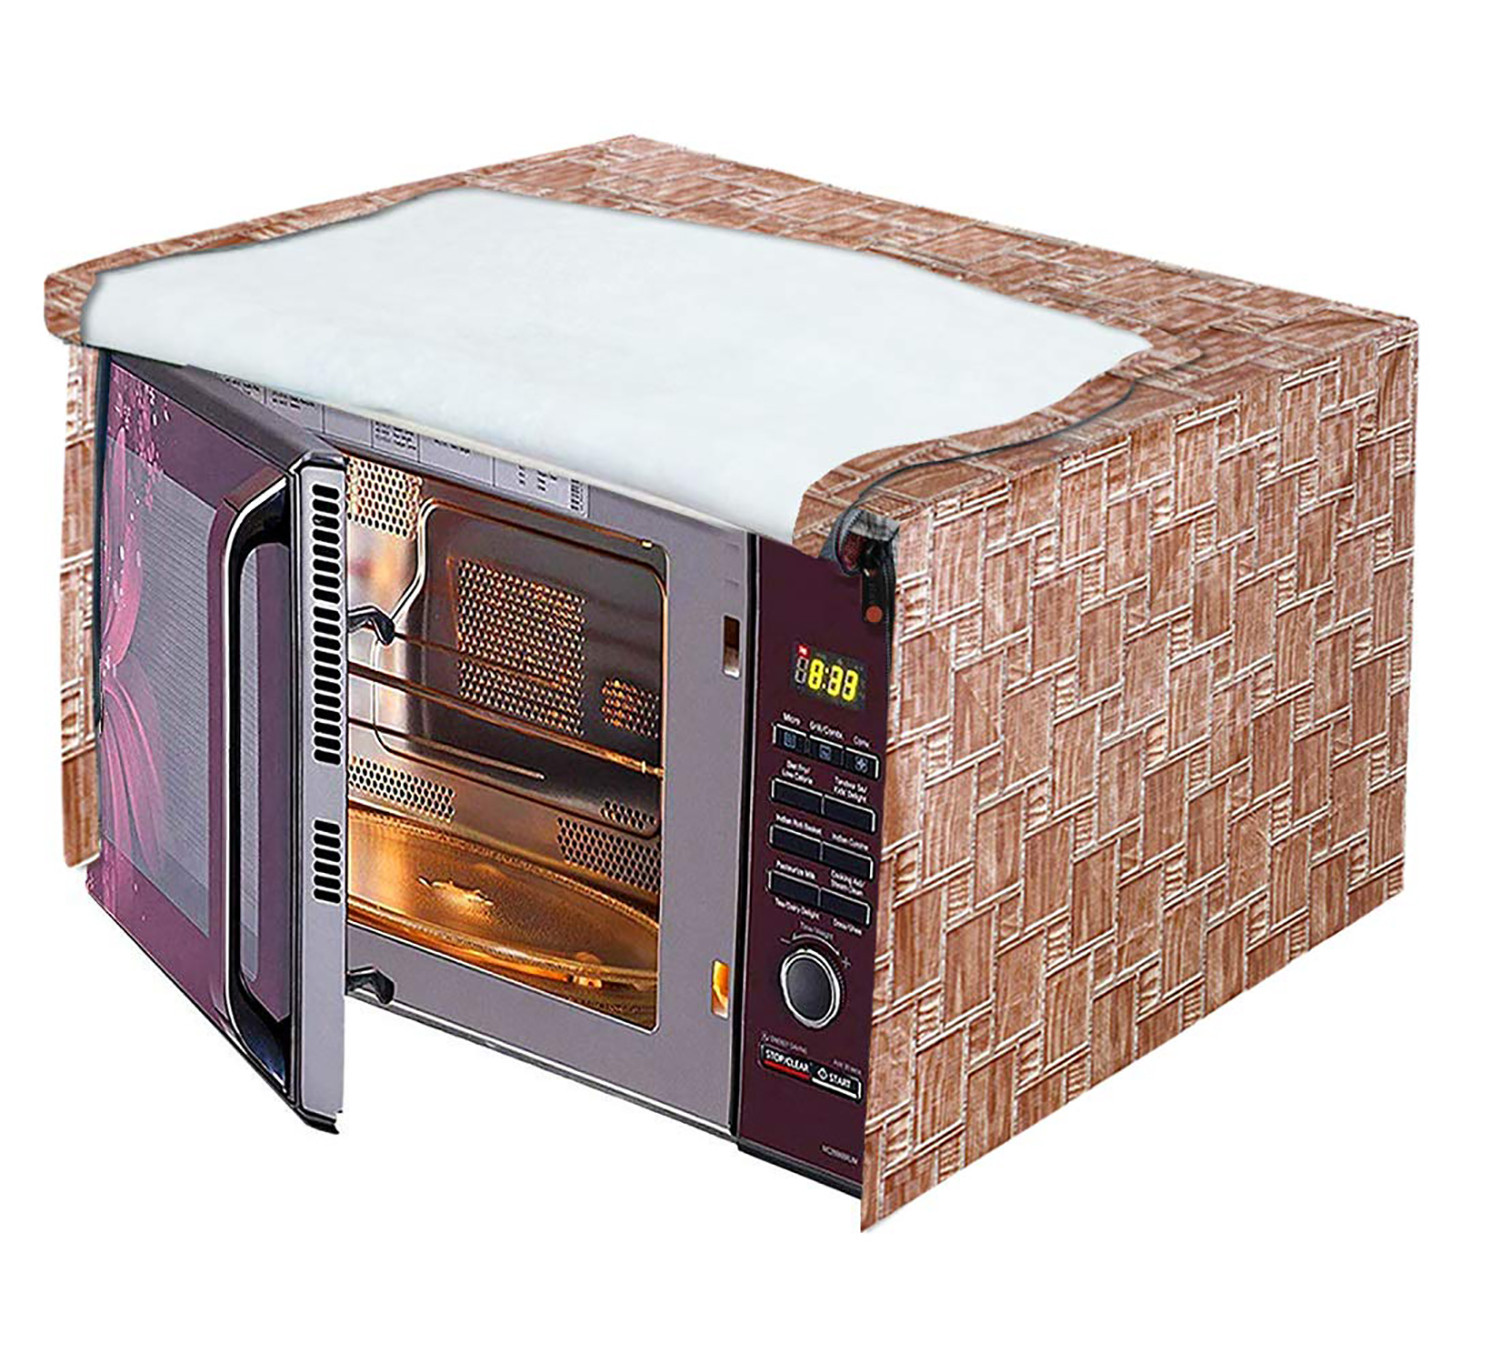 Kuber Industries PVC Wooden Check Printed Microwave Oven Cover,20 Ltr. (Brown)-HS43KUBMART25985